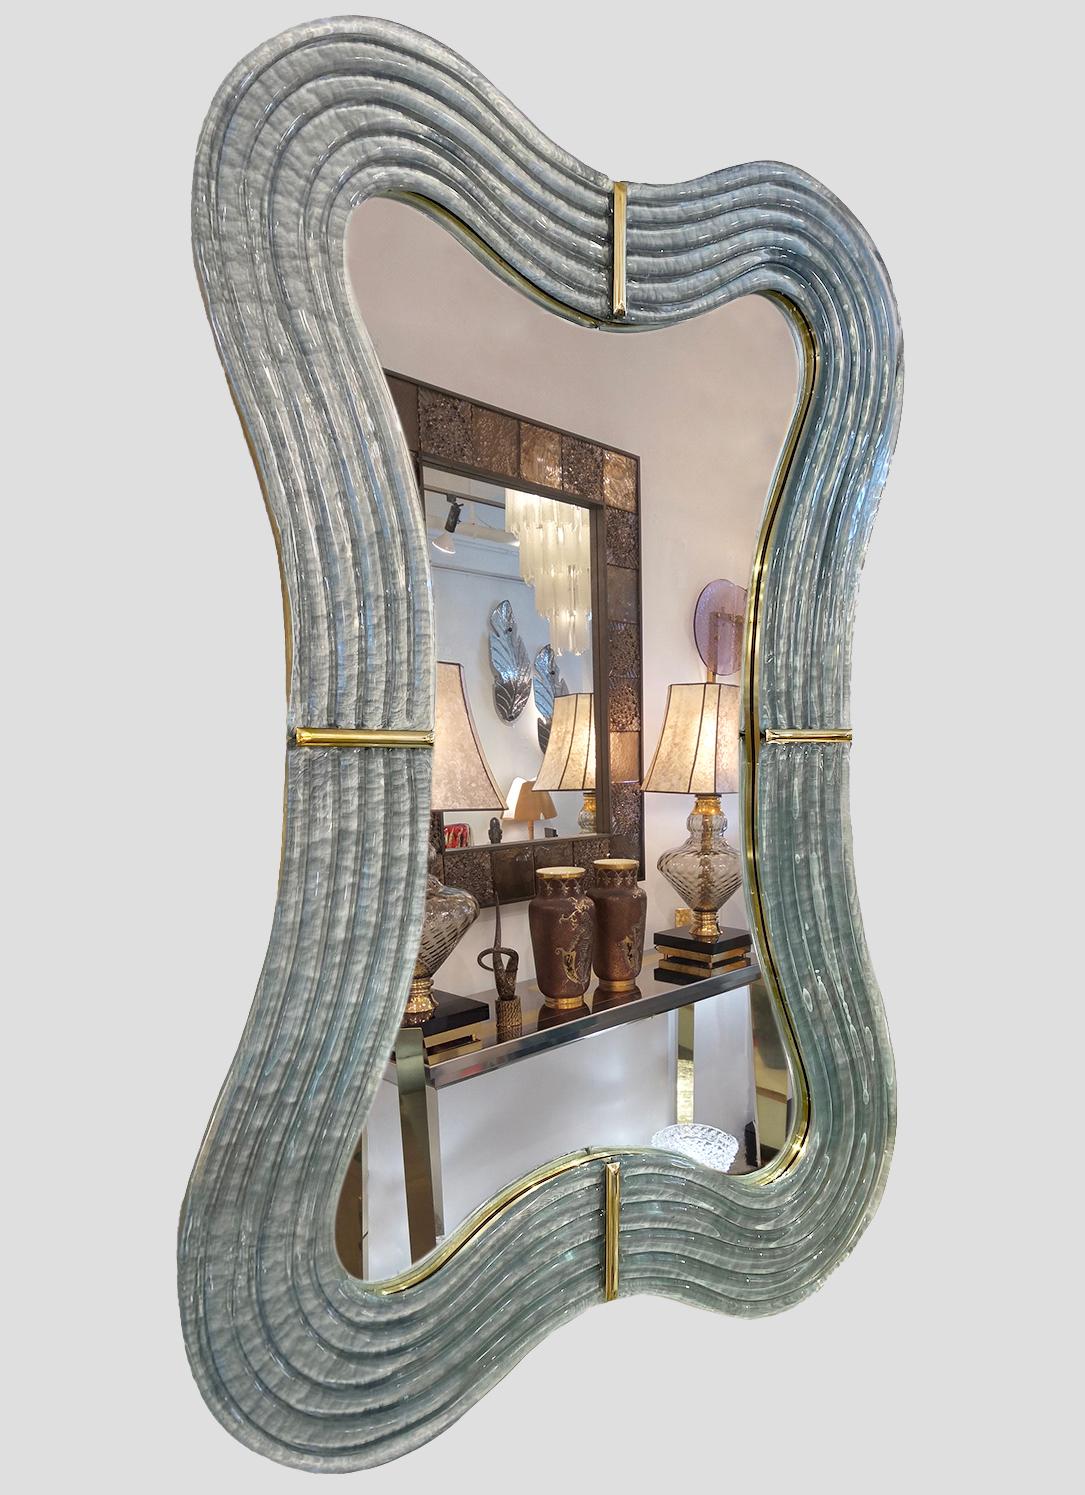 This Venetian mirror brings a sensuous soothing feeling with its curved silhouette, entirely handcrafted in Italy. The sexy waved shape presents exquisite craftsmanship: the hand-carved wooden back, entirely edged in brass, is decorated with a